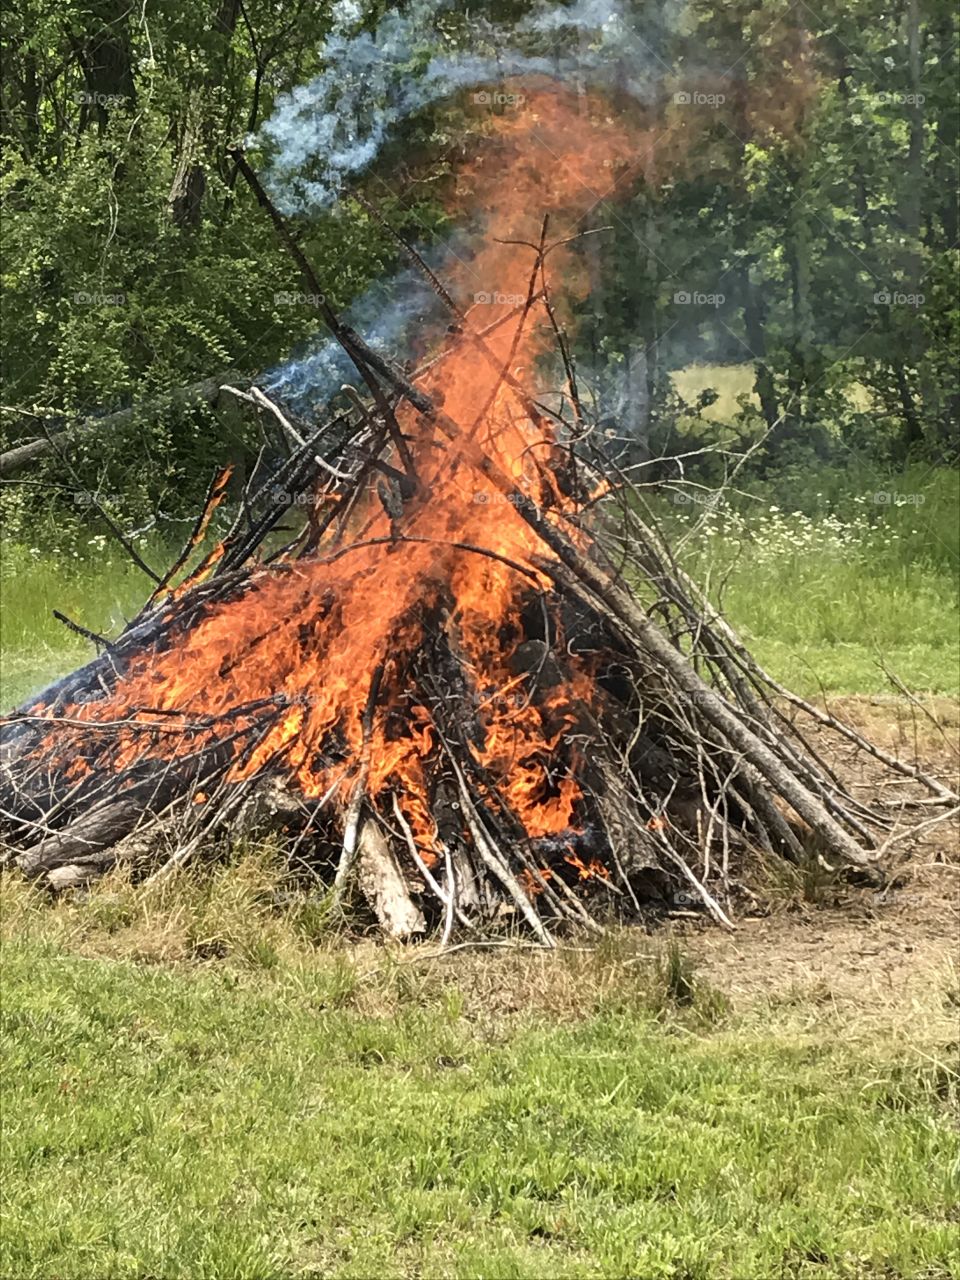 Bonfire during the daytime, with green grass around it and trees in the background.